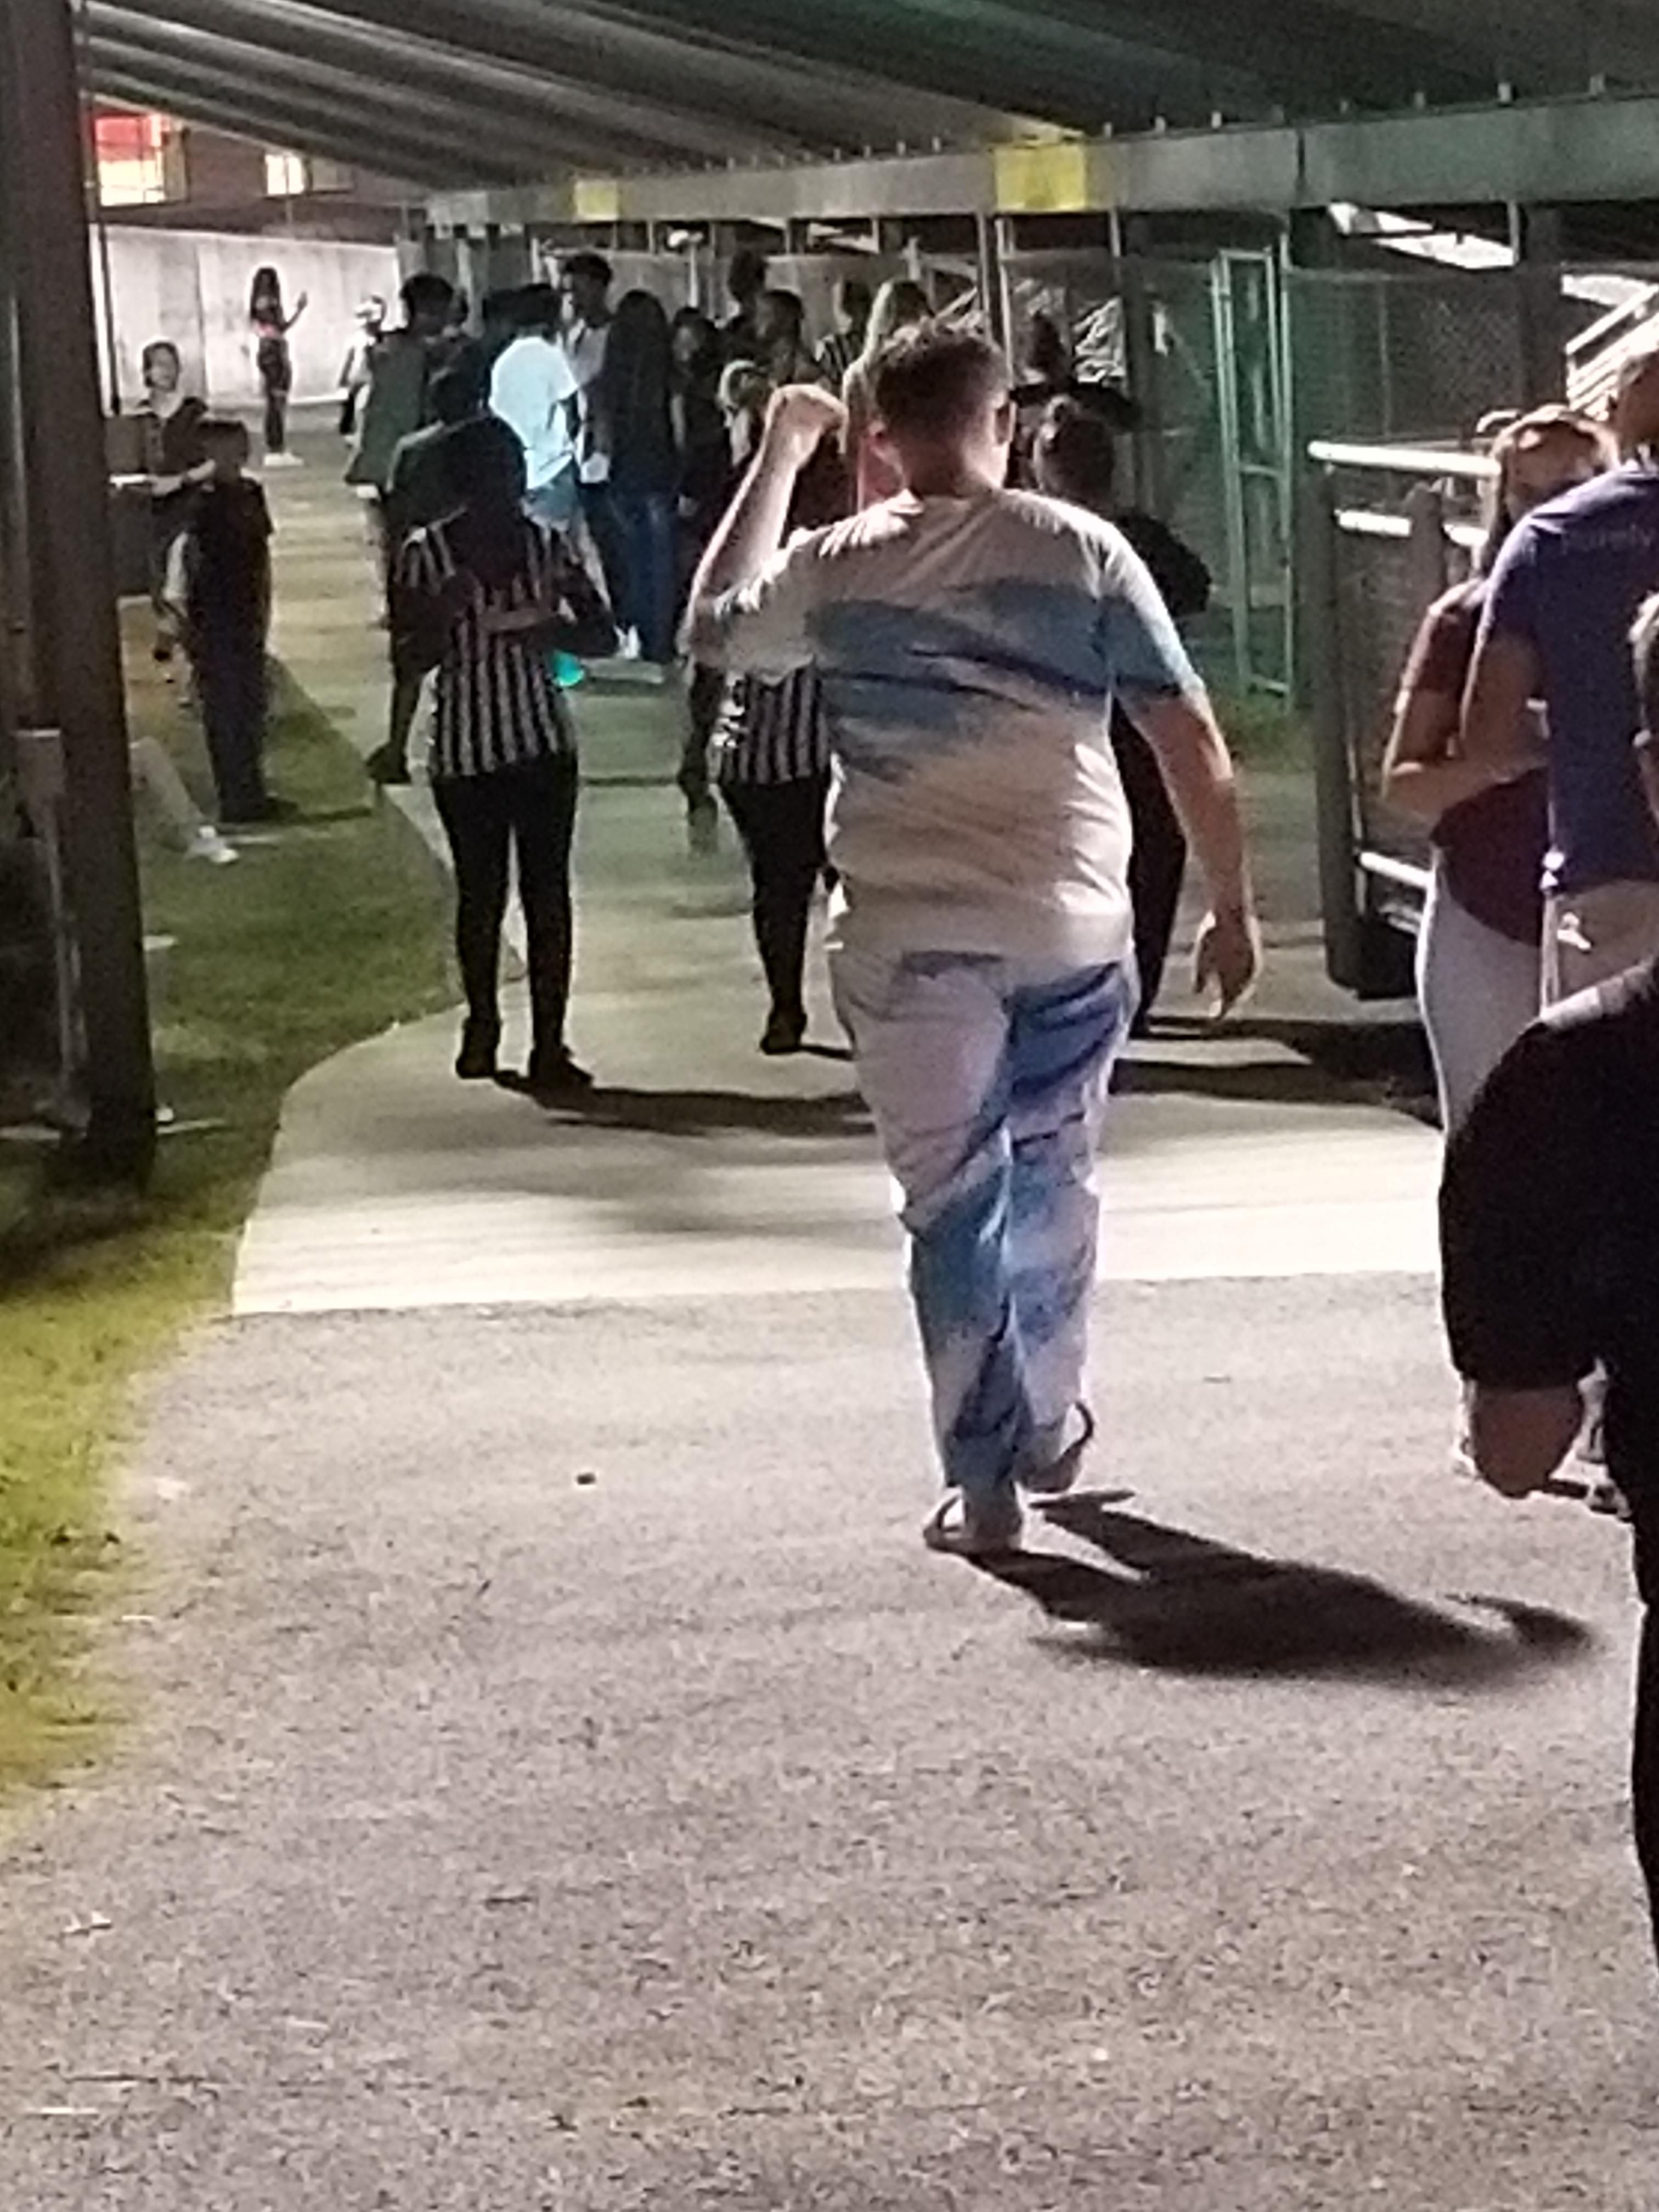 This dude is dressed like a 90's cafeteria cup.